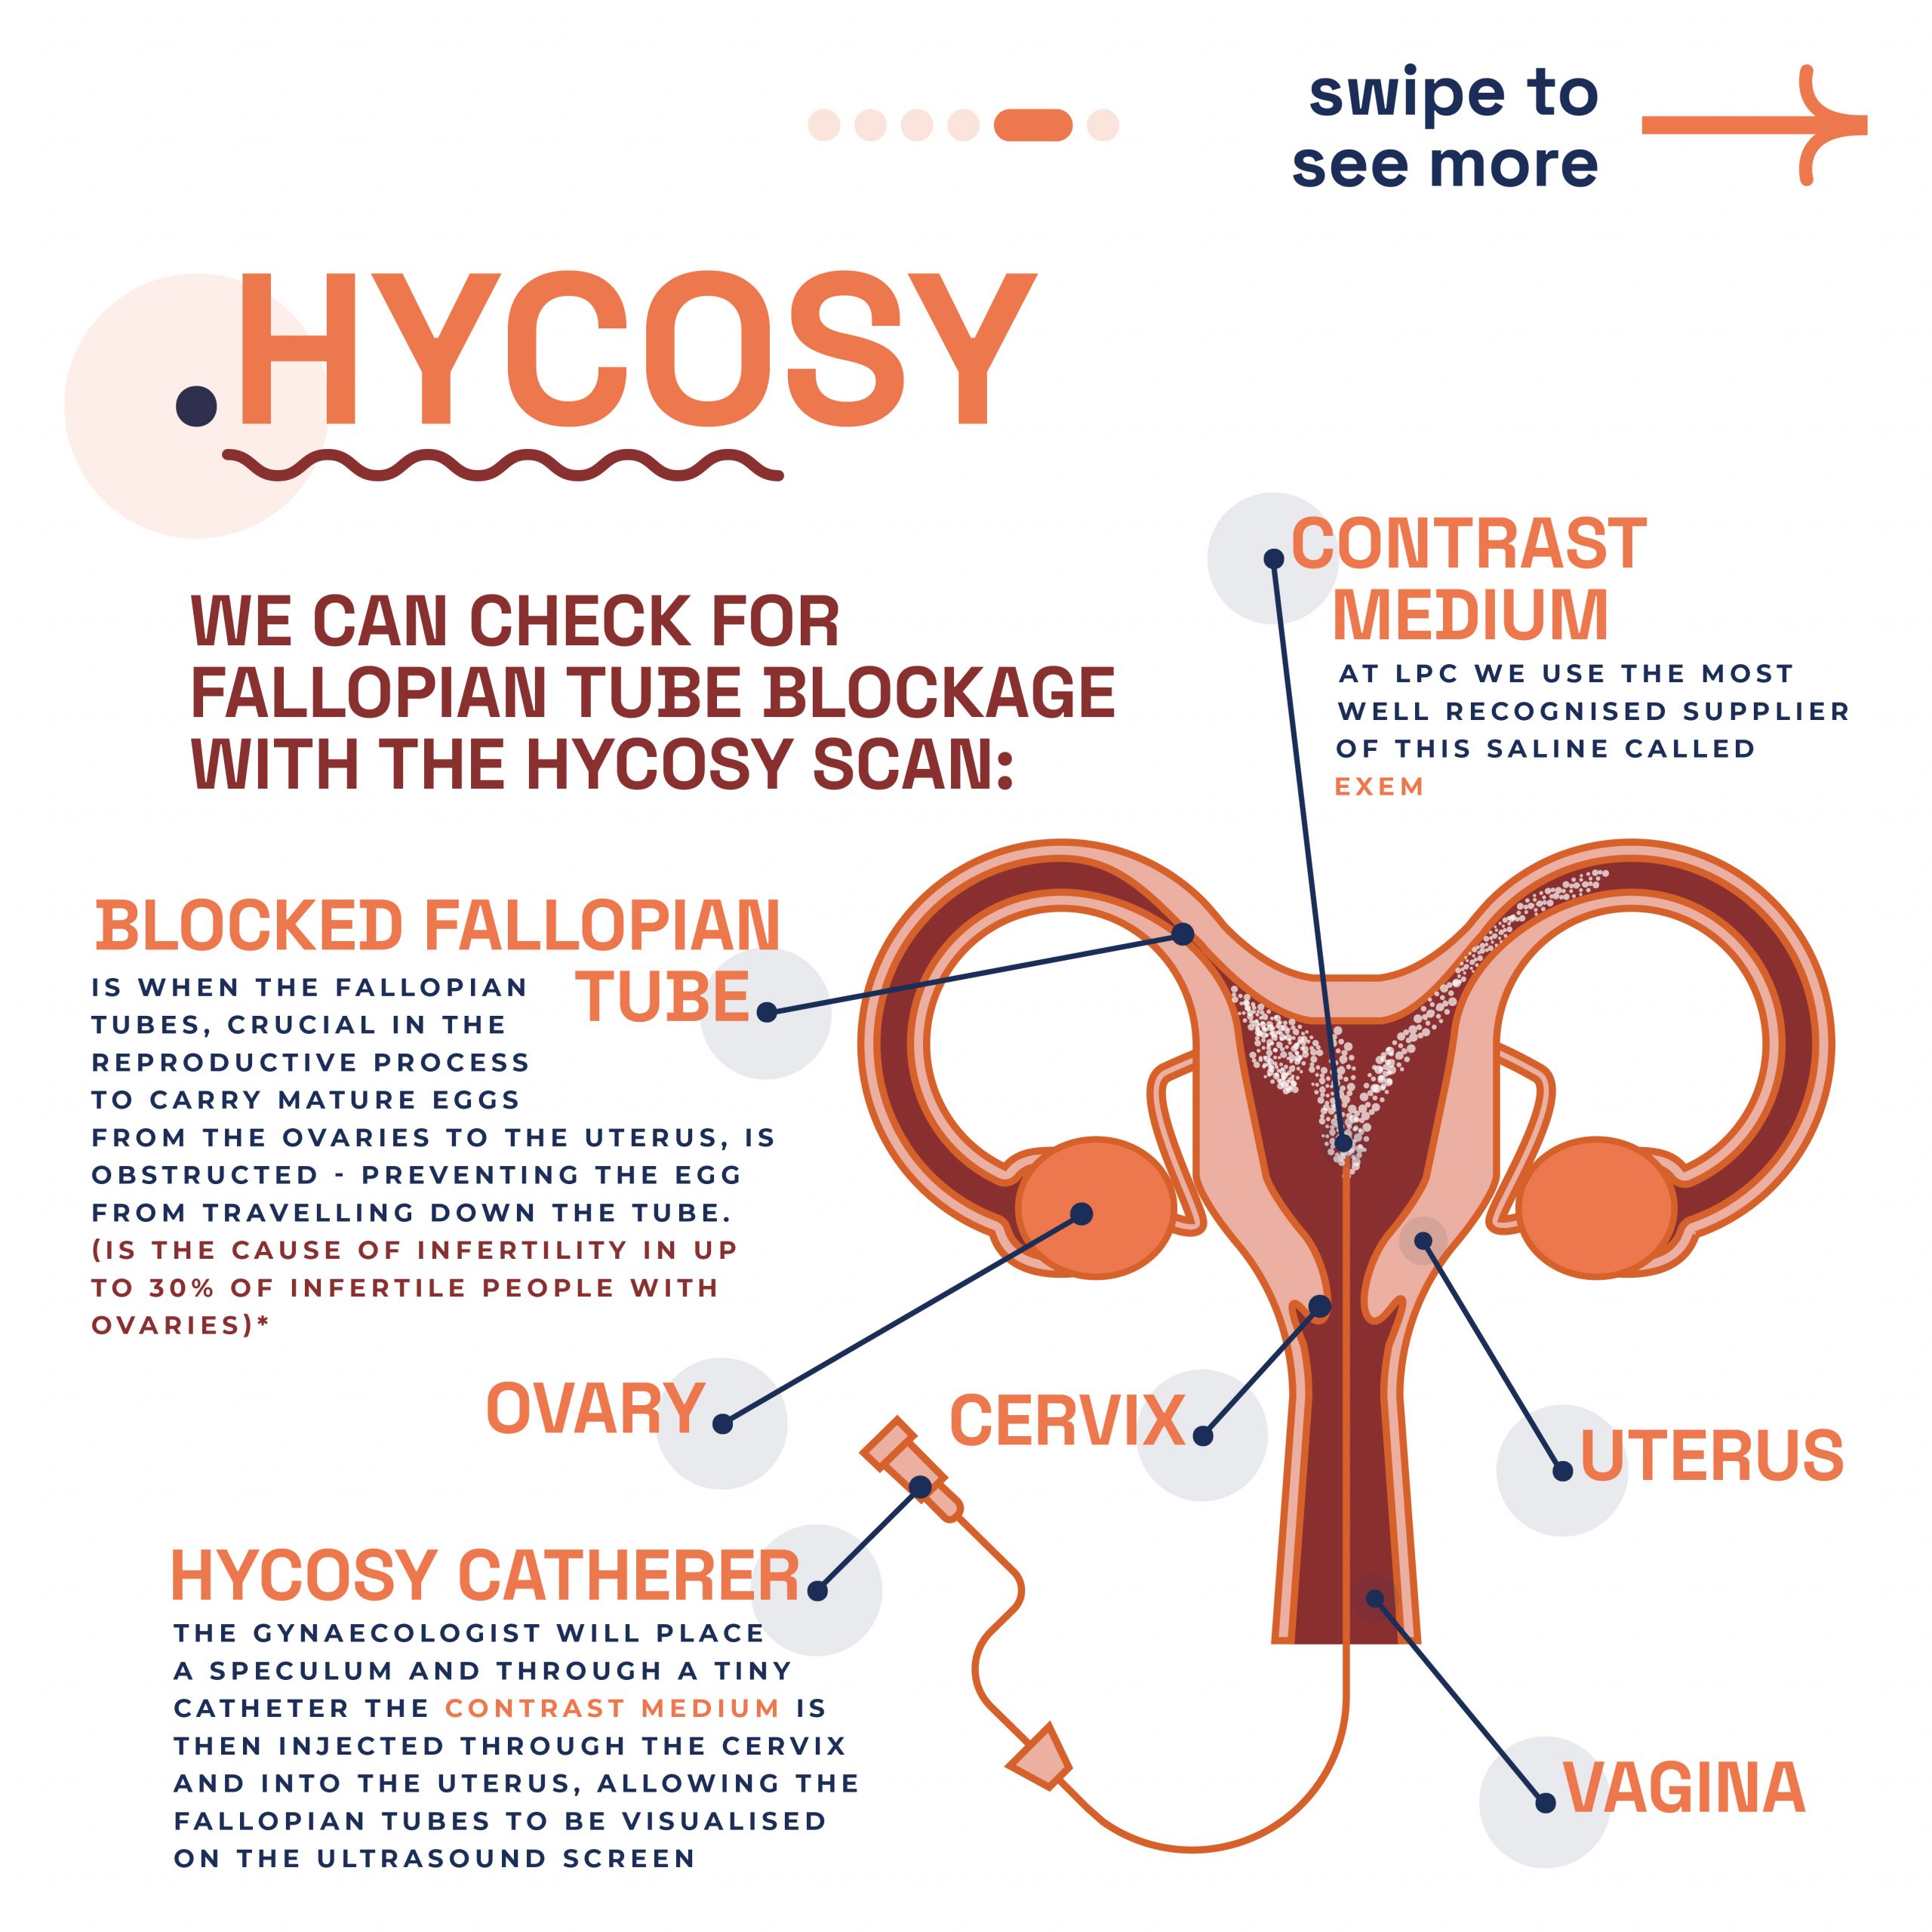 Explanation of the HYCOSY scan procedure for checking fallopian tube blockage, offered by London Pregnancy Clinic.